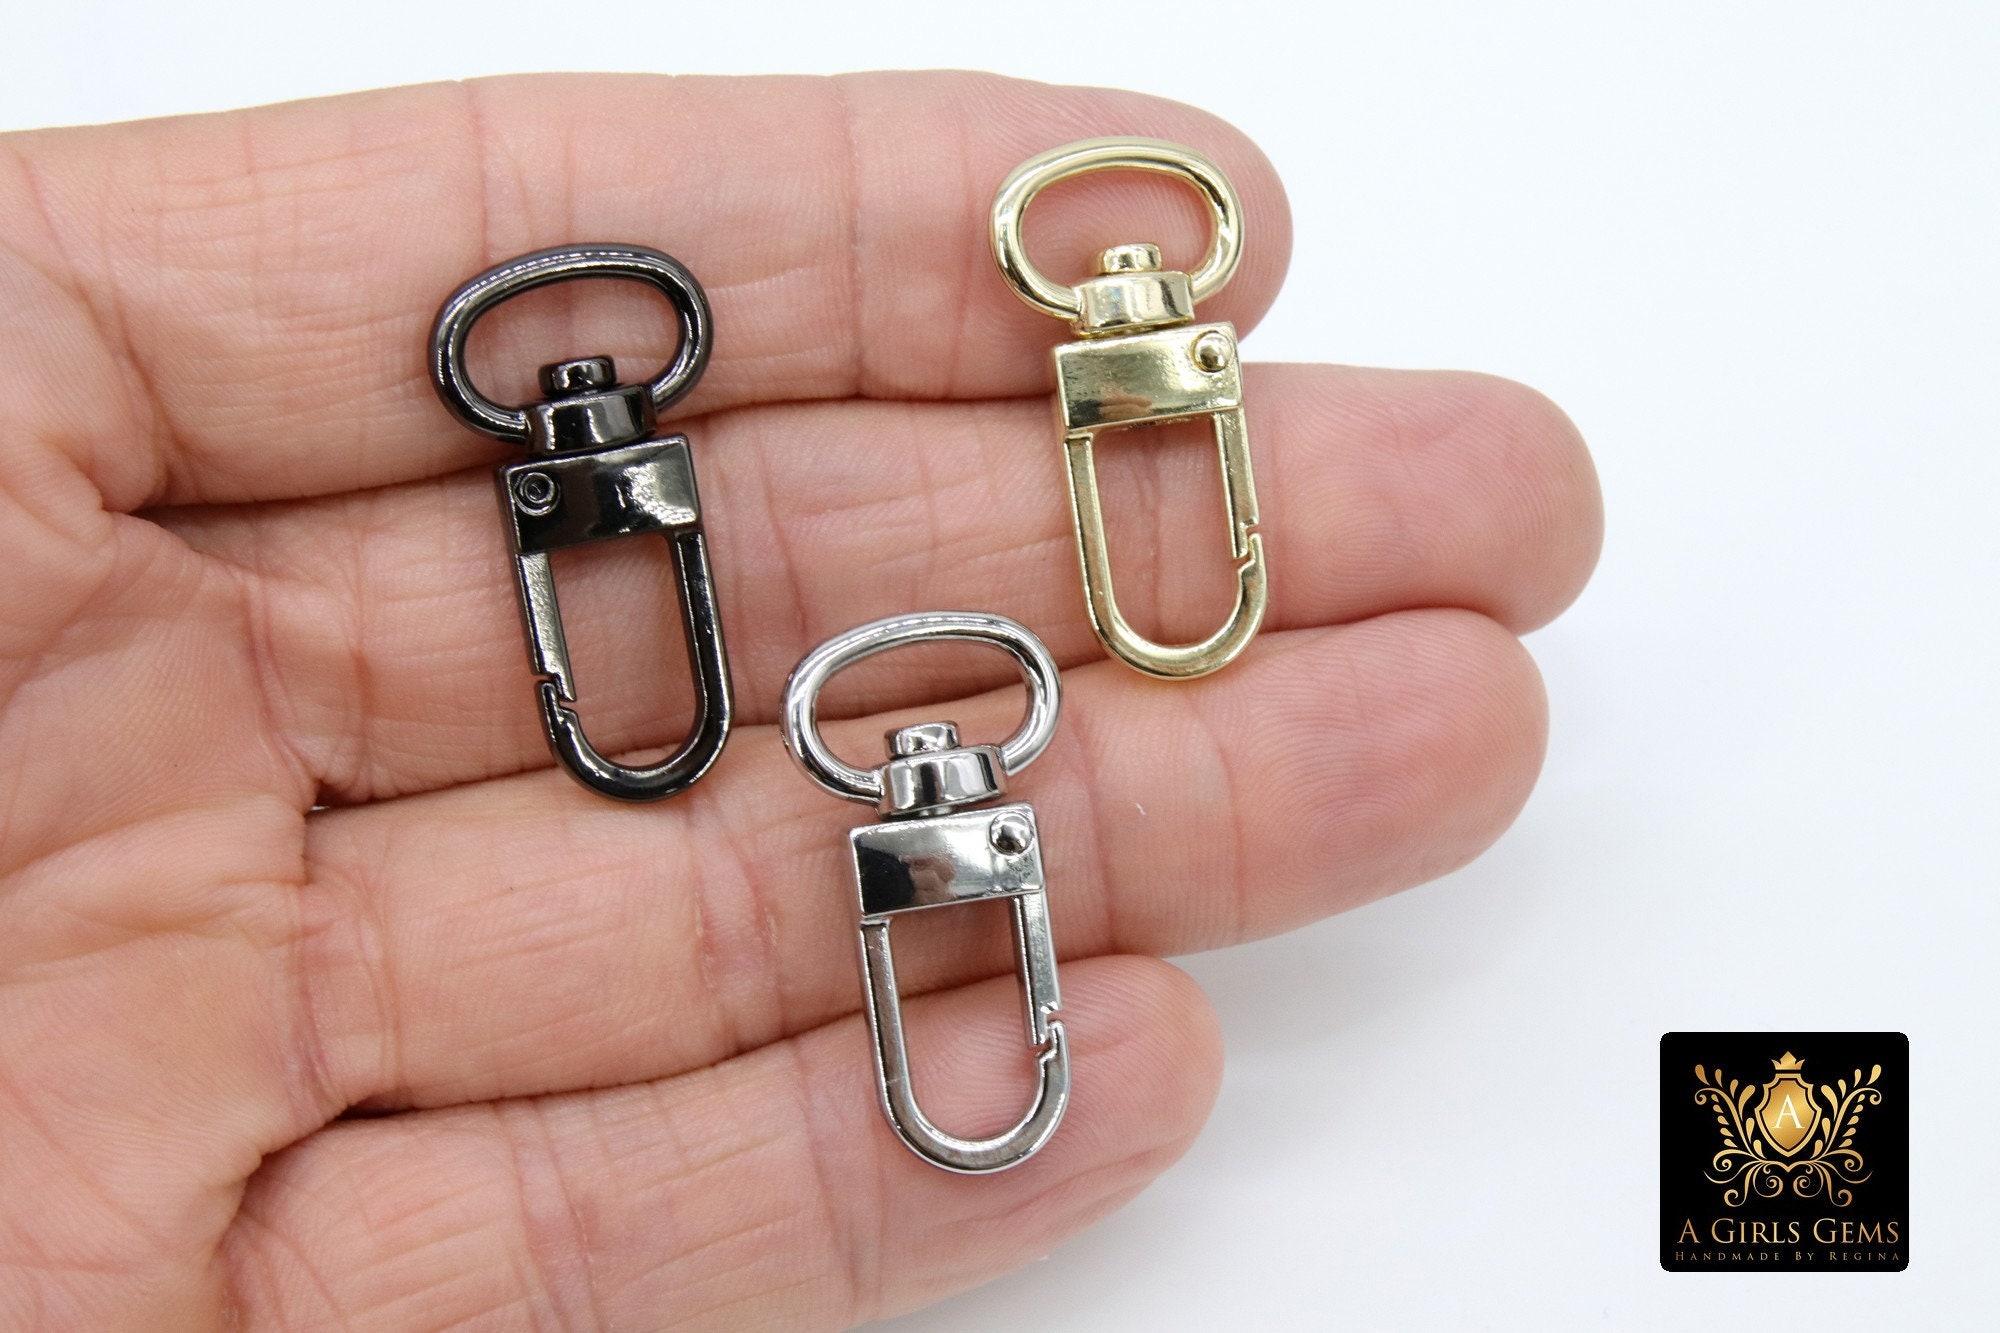 Alloy Spring Clasp, Double S Hook Spring Clasp. Easy Open Spring Gate, Gate  Clasp, Necklace Building, Charm Holder, 32m X 14mm WHOLESALE 